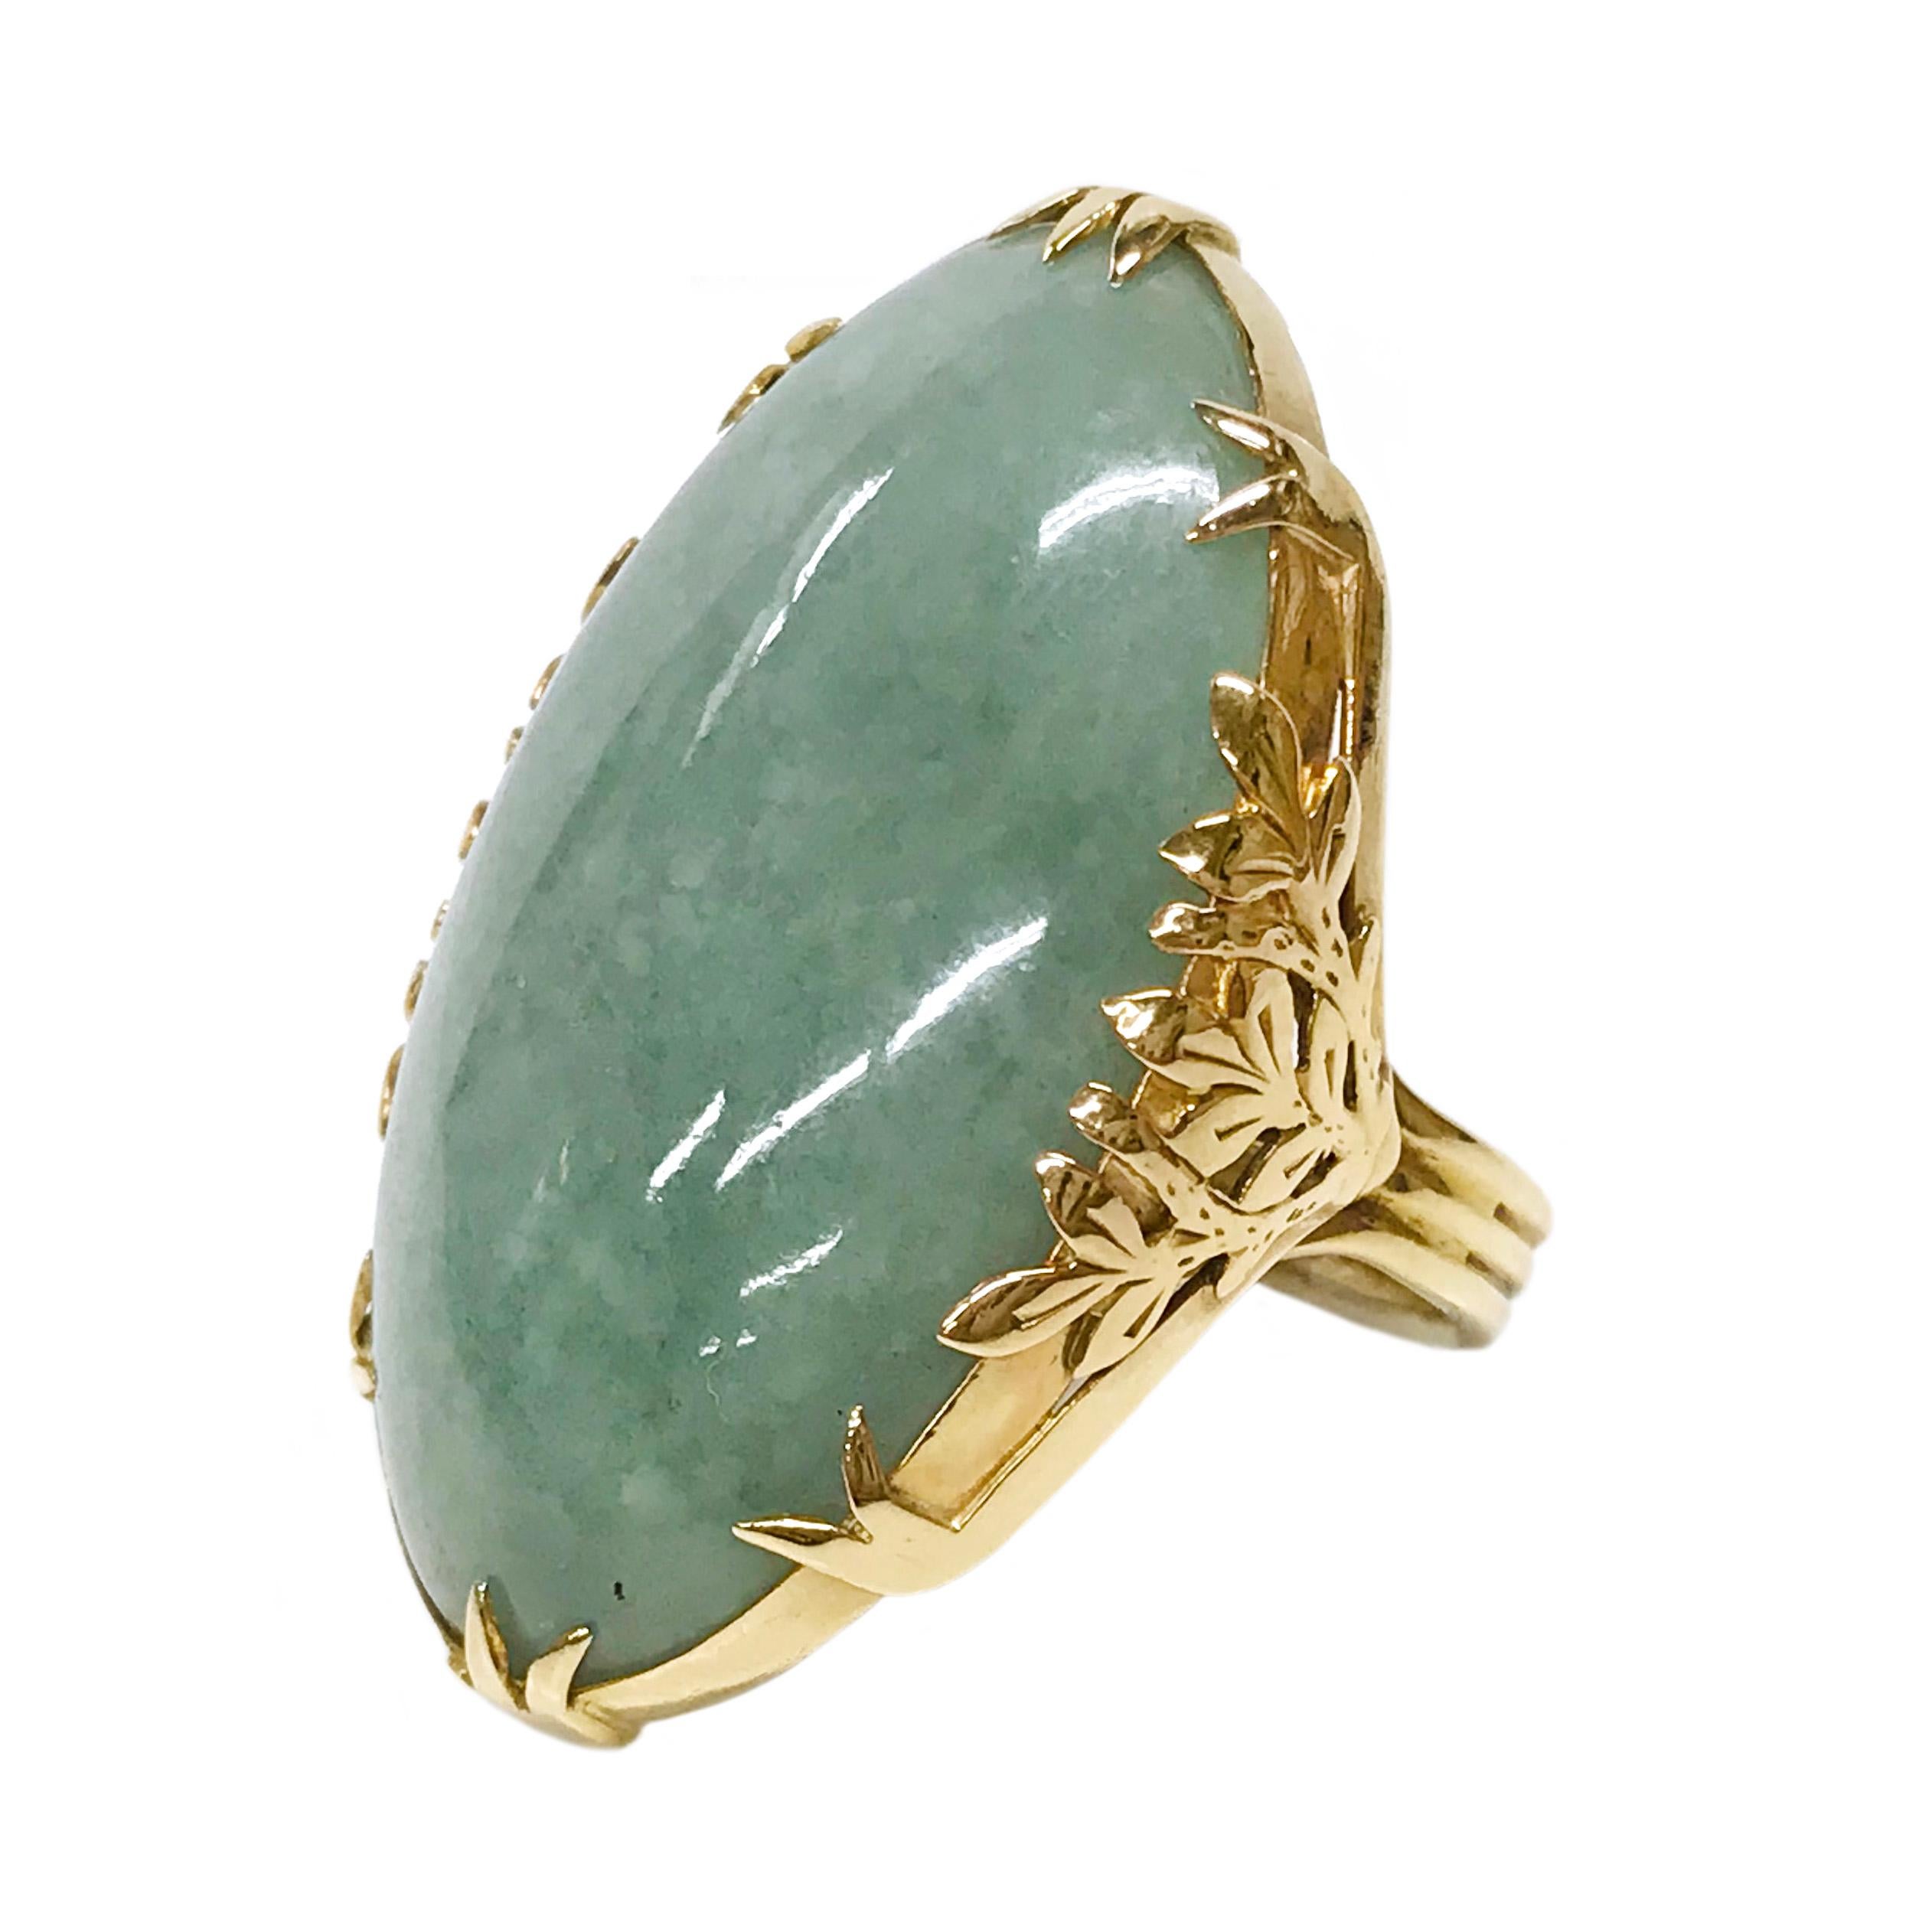 14 Karat Jadeite Navette Ring. The ring features a large jadeite cabochon measuring 36.9 tall x 23.2mm wide. There is a thin band under the gallery which combines with two other thin bands creating one larger band. The prongs are leaf-like in shape